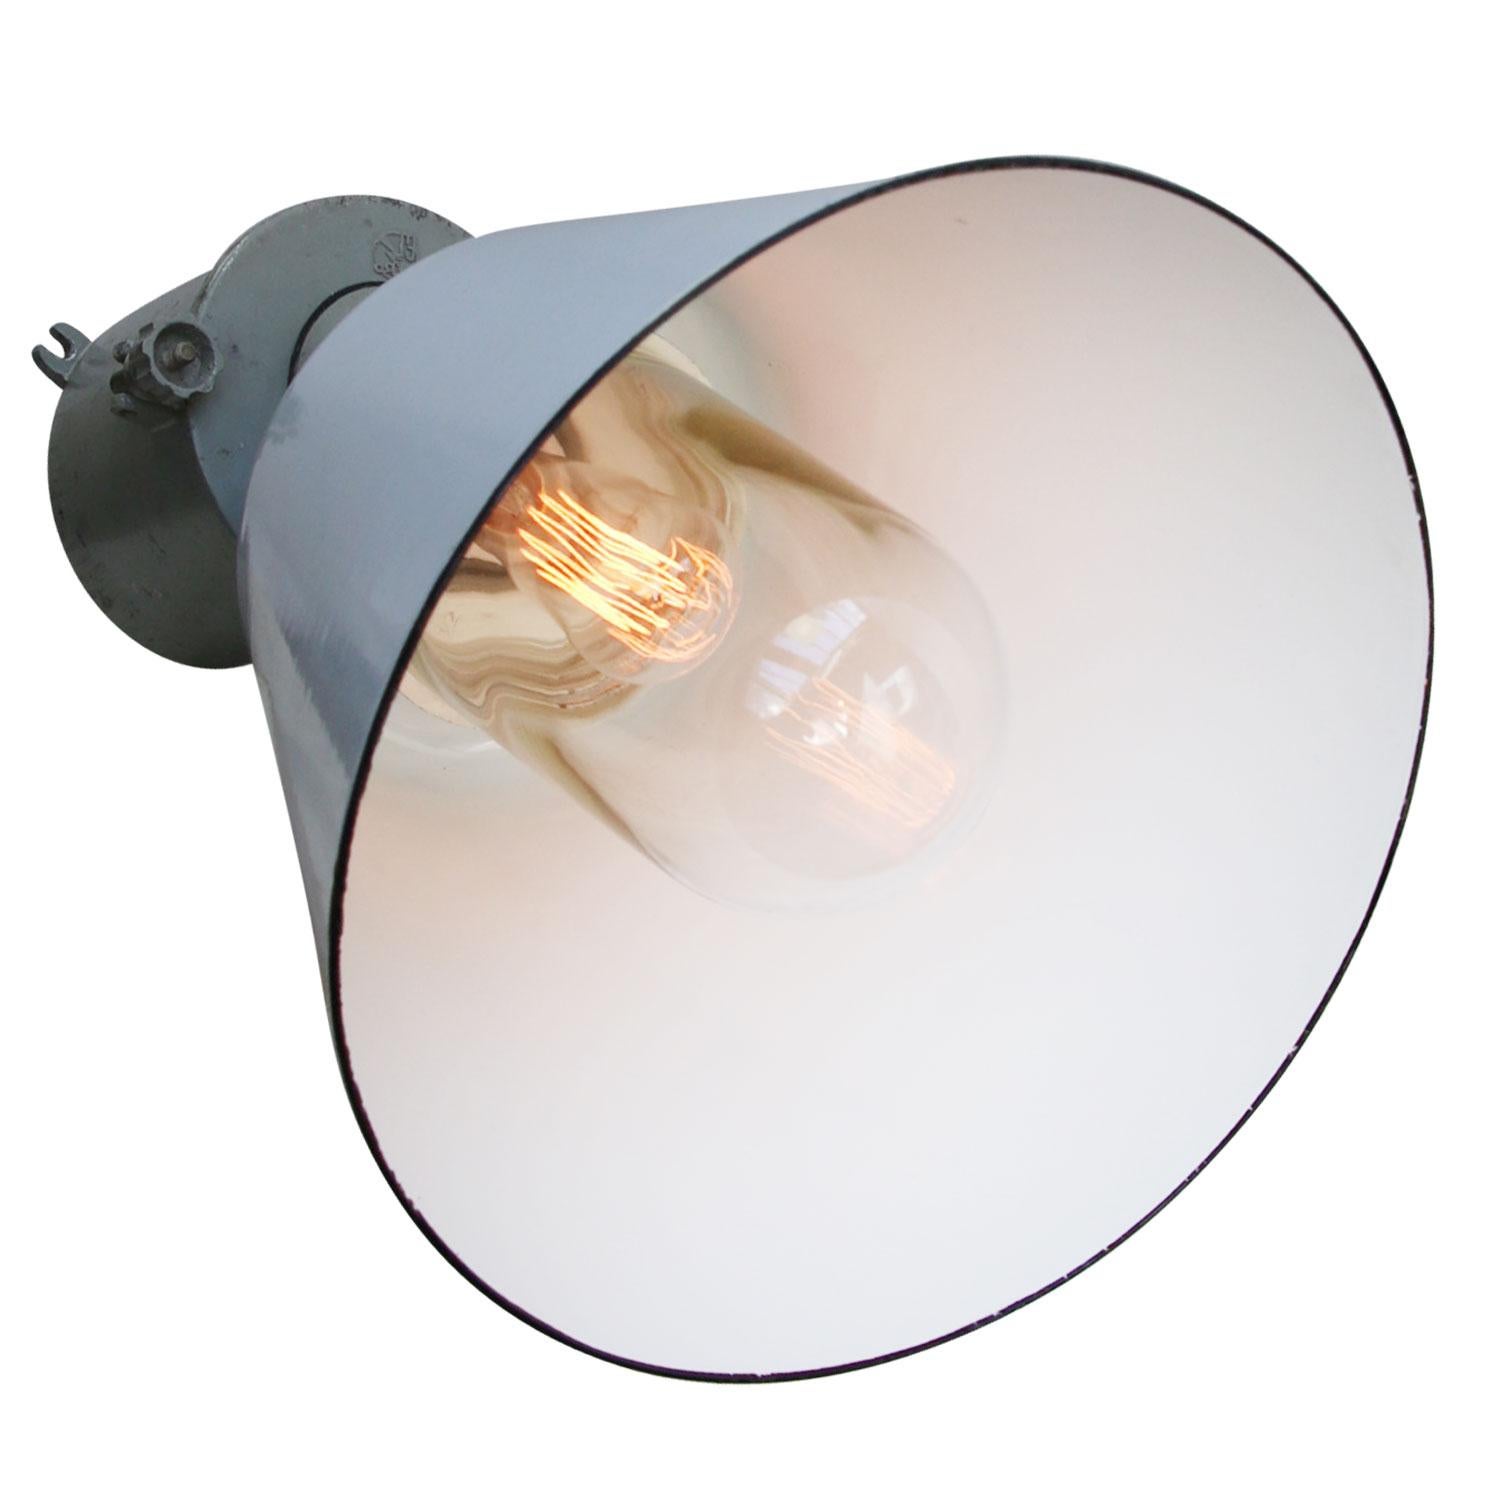 large industrial wall light by ELBO
grey enamel, cast aluminium wall mount, clear glass

Weight: 4.20 kg / 9.3 lb

Priced per individual item. All lamps have been made suitable by international standards for incandescent light bulbs,